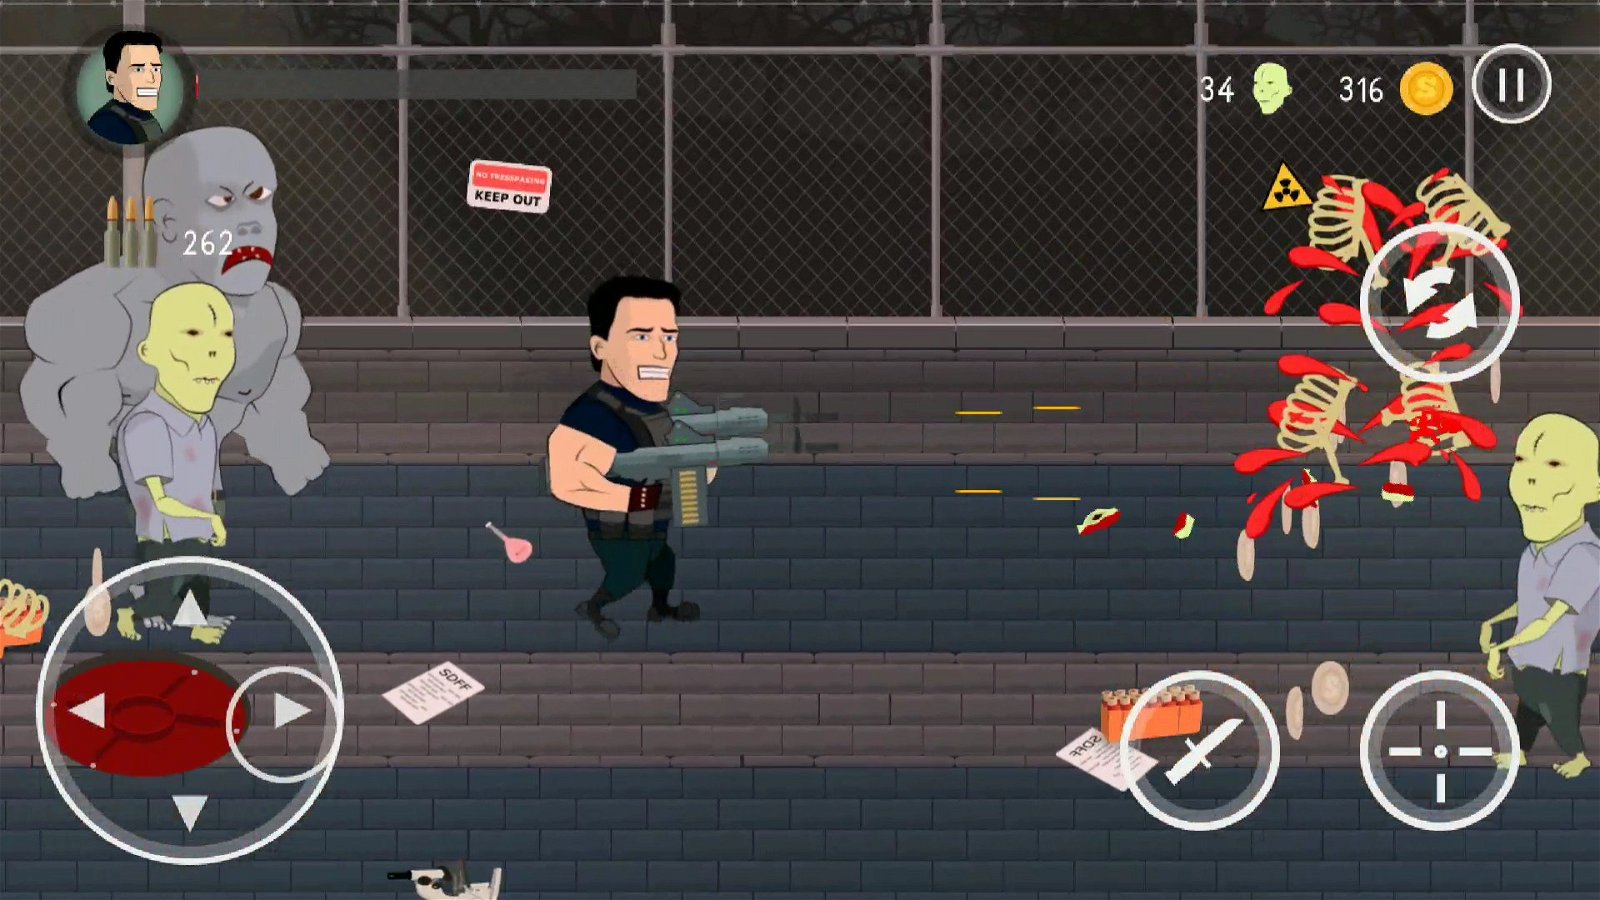 Image of Guns and Blood: 2D Zombie Shooter